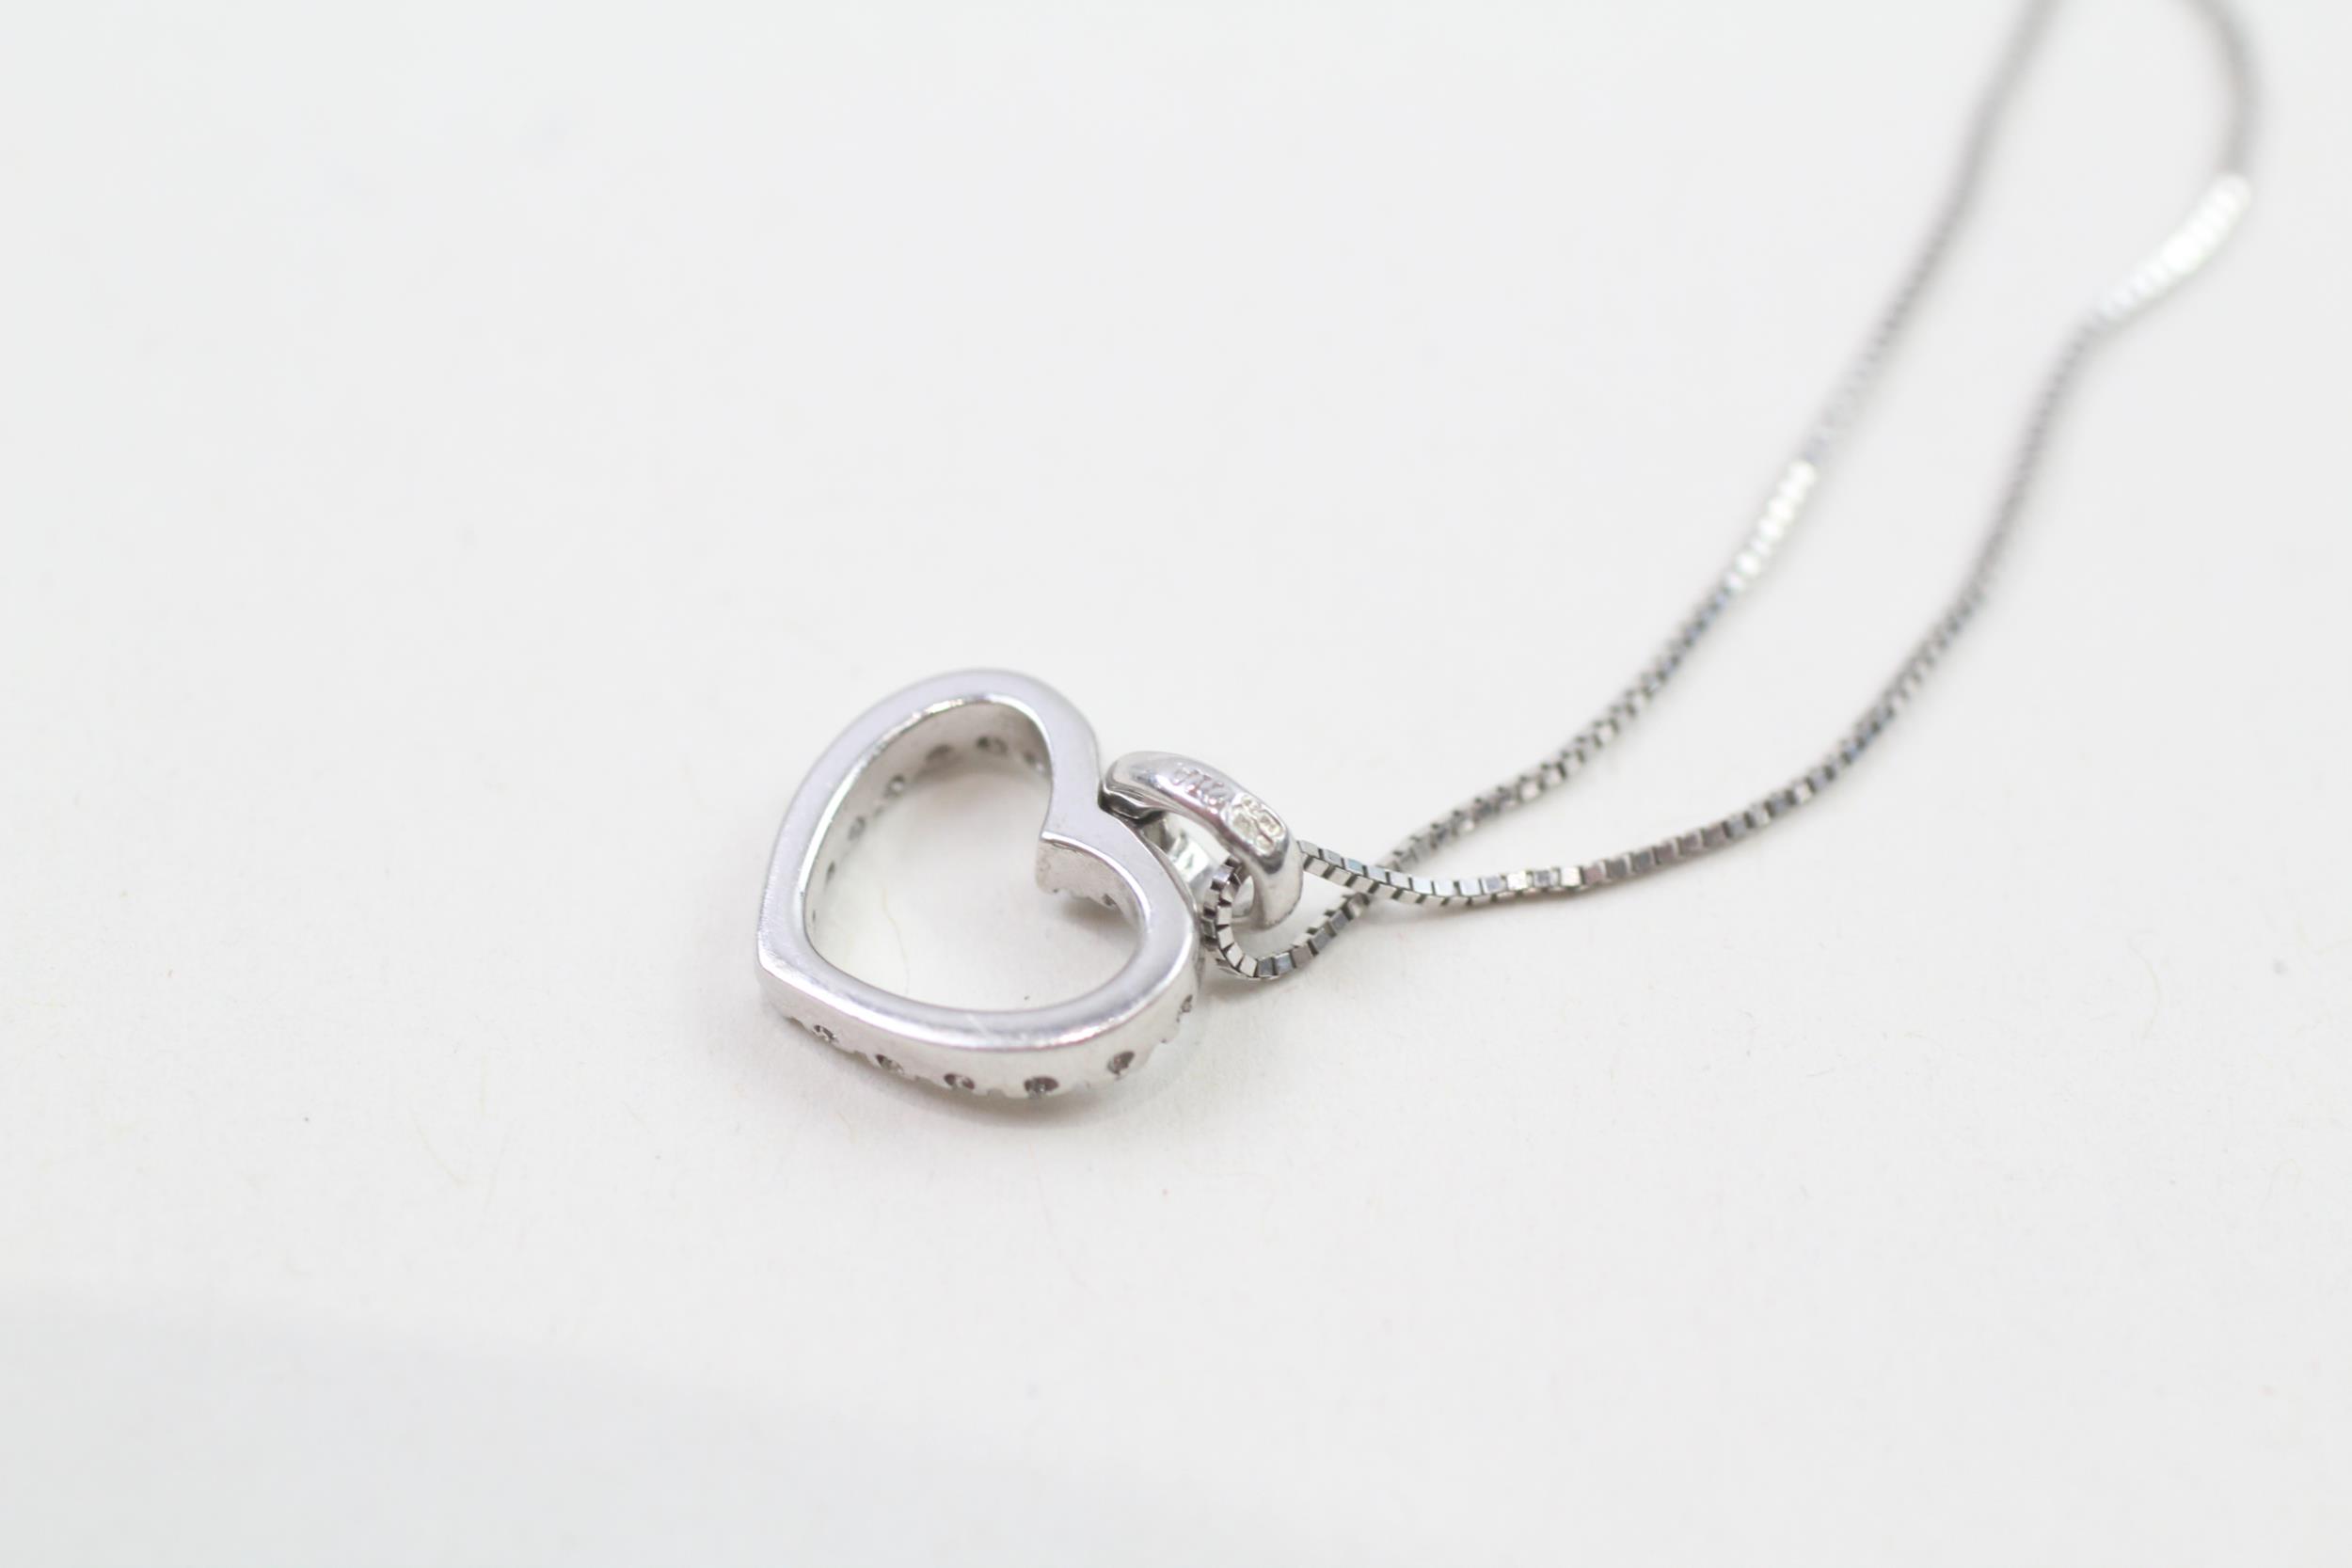 9ct white gold diamond heart pendant necklace (2.1g) - Image 4 of 4